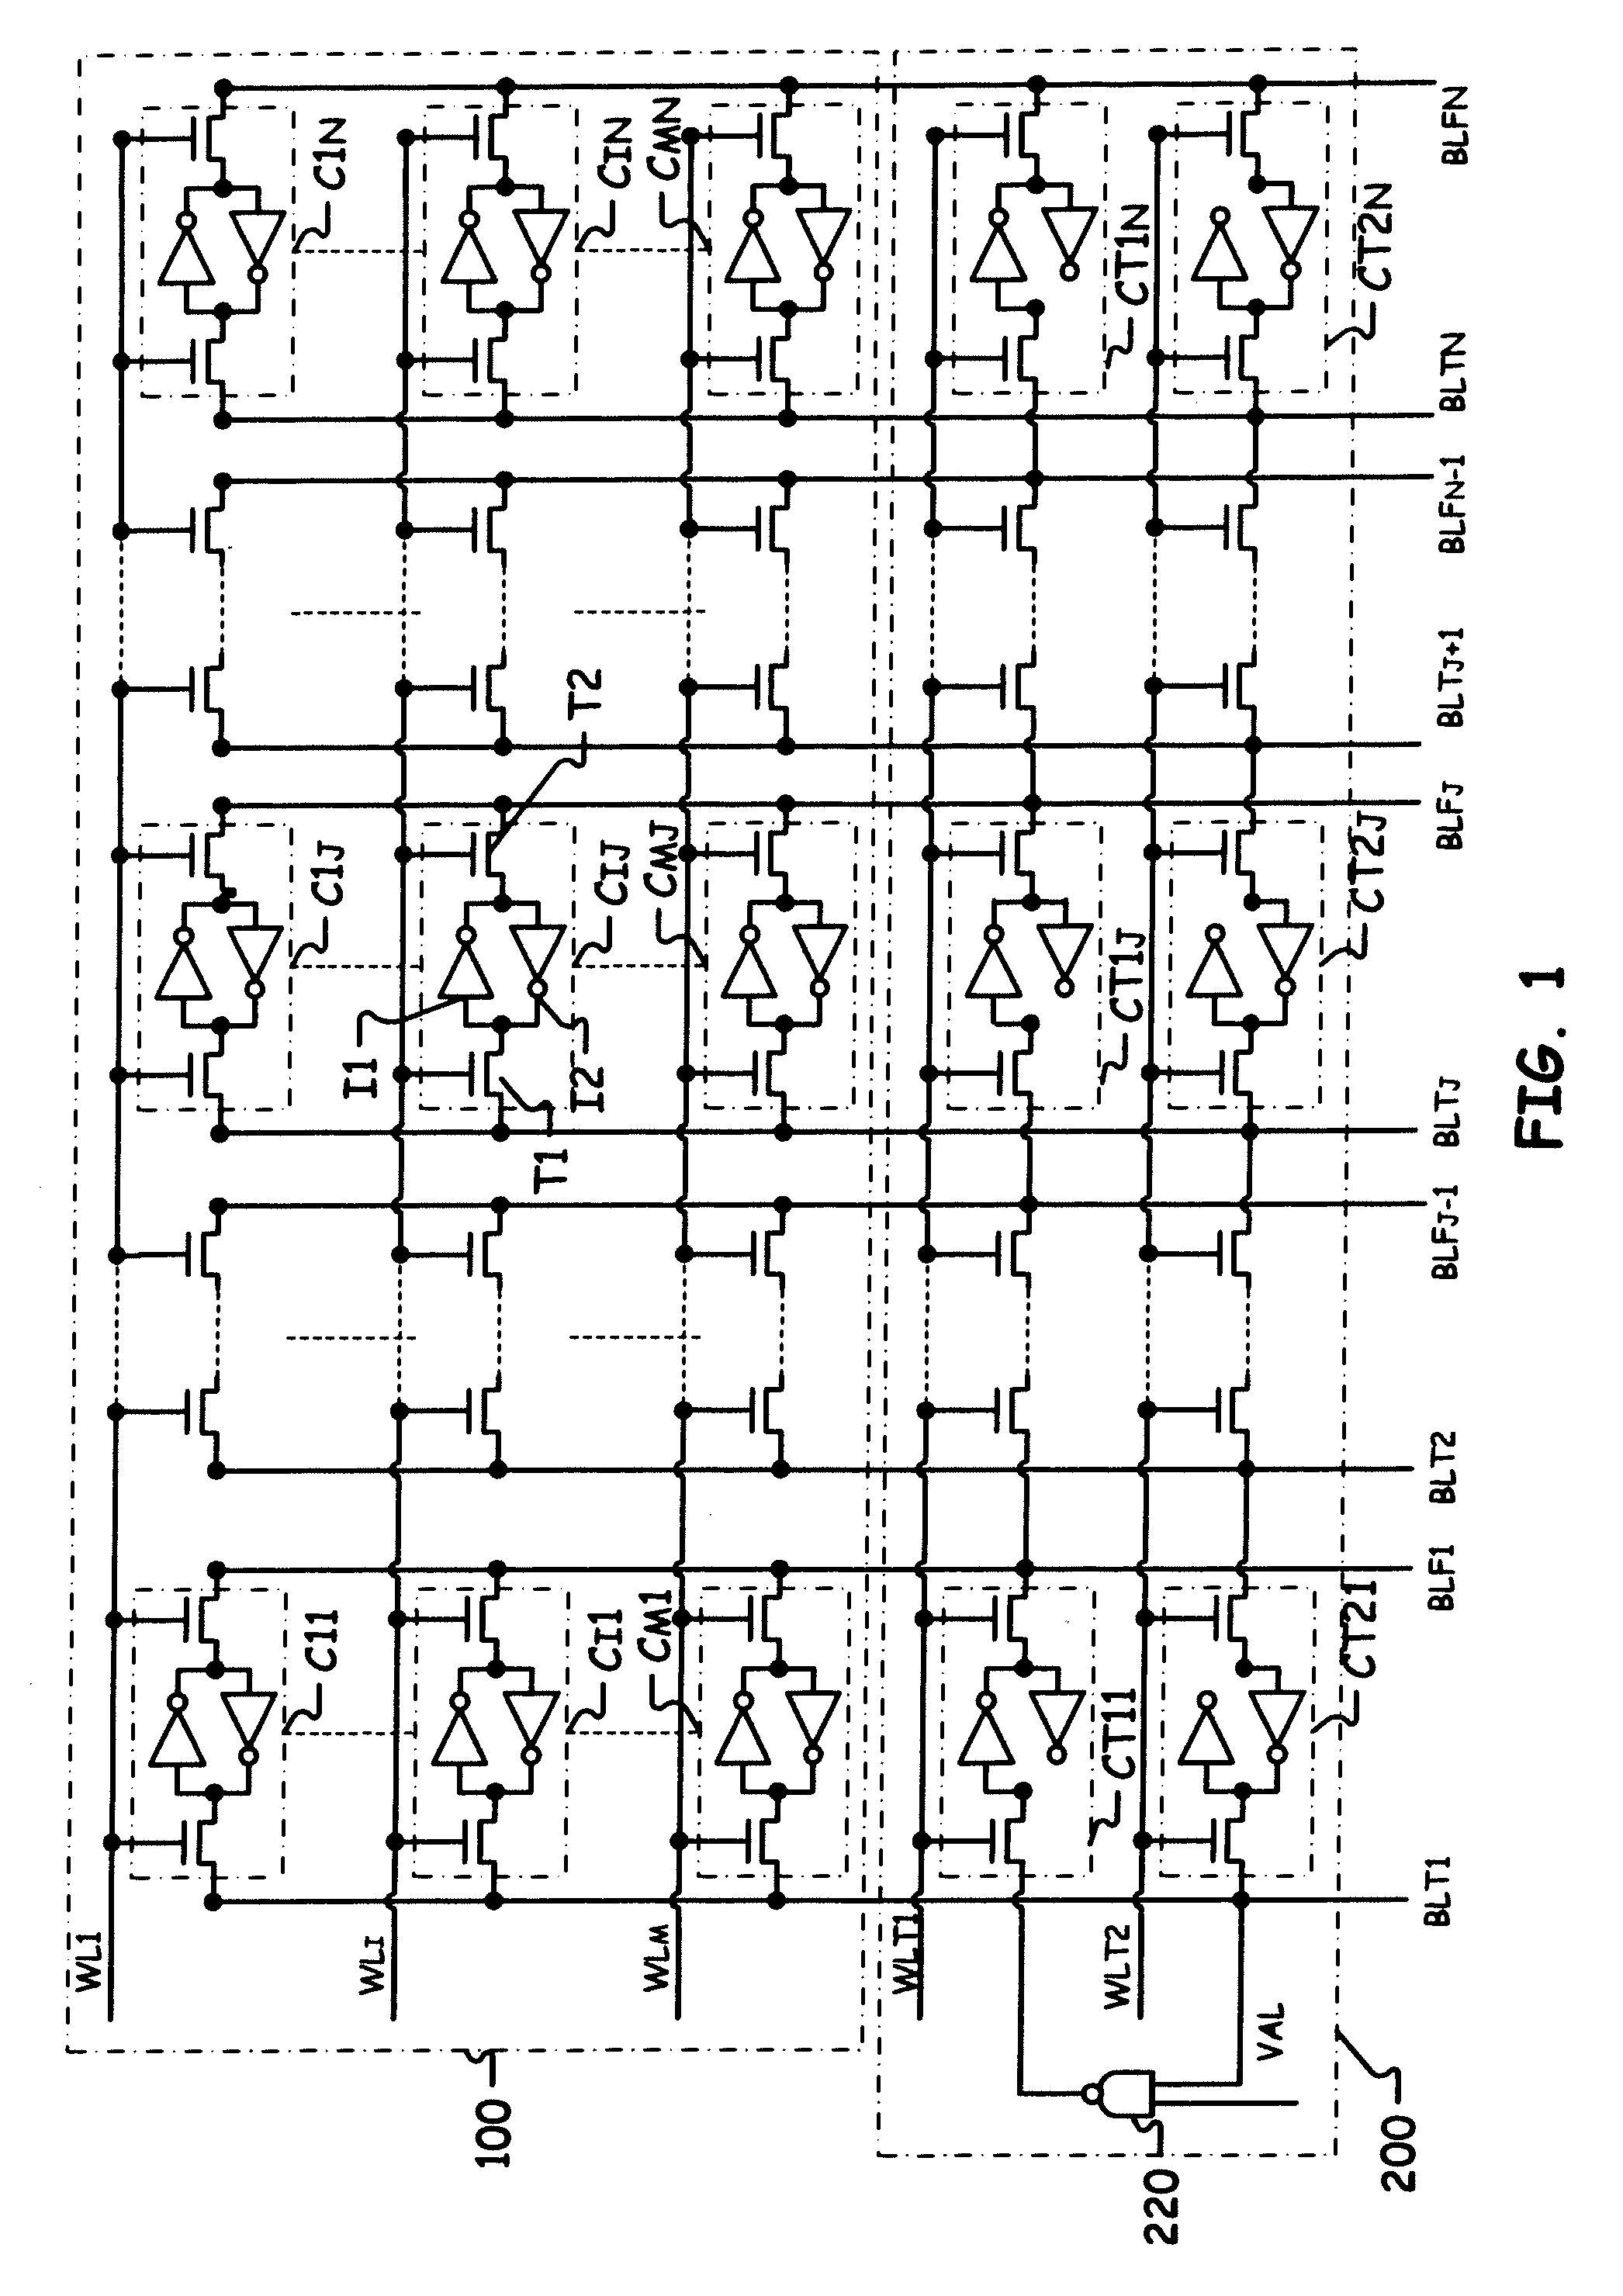 Memory including a performance test circuit